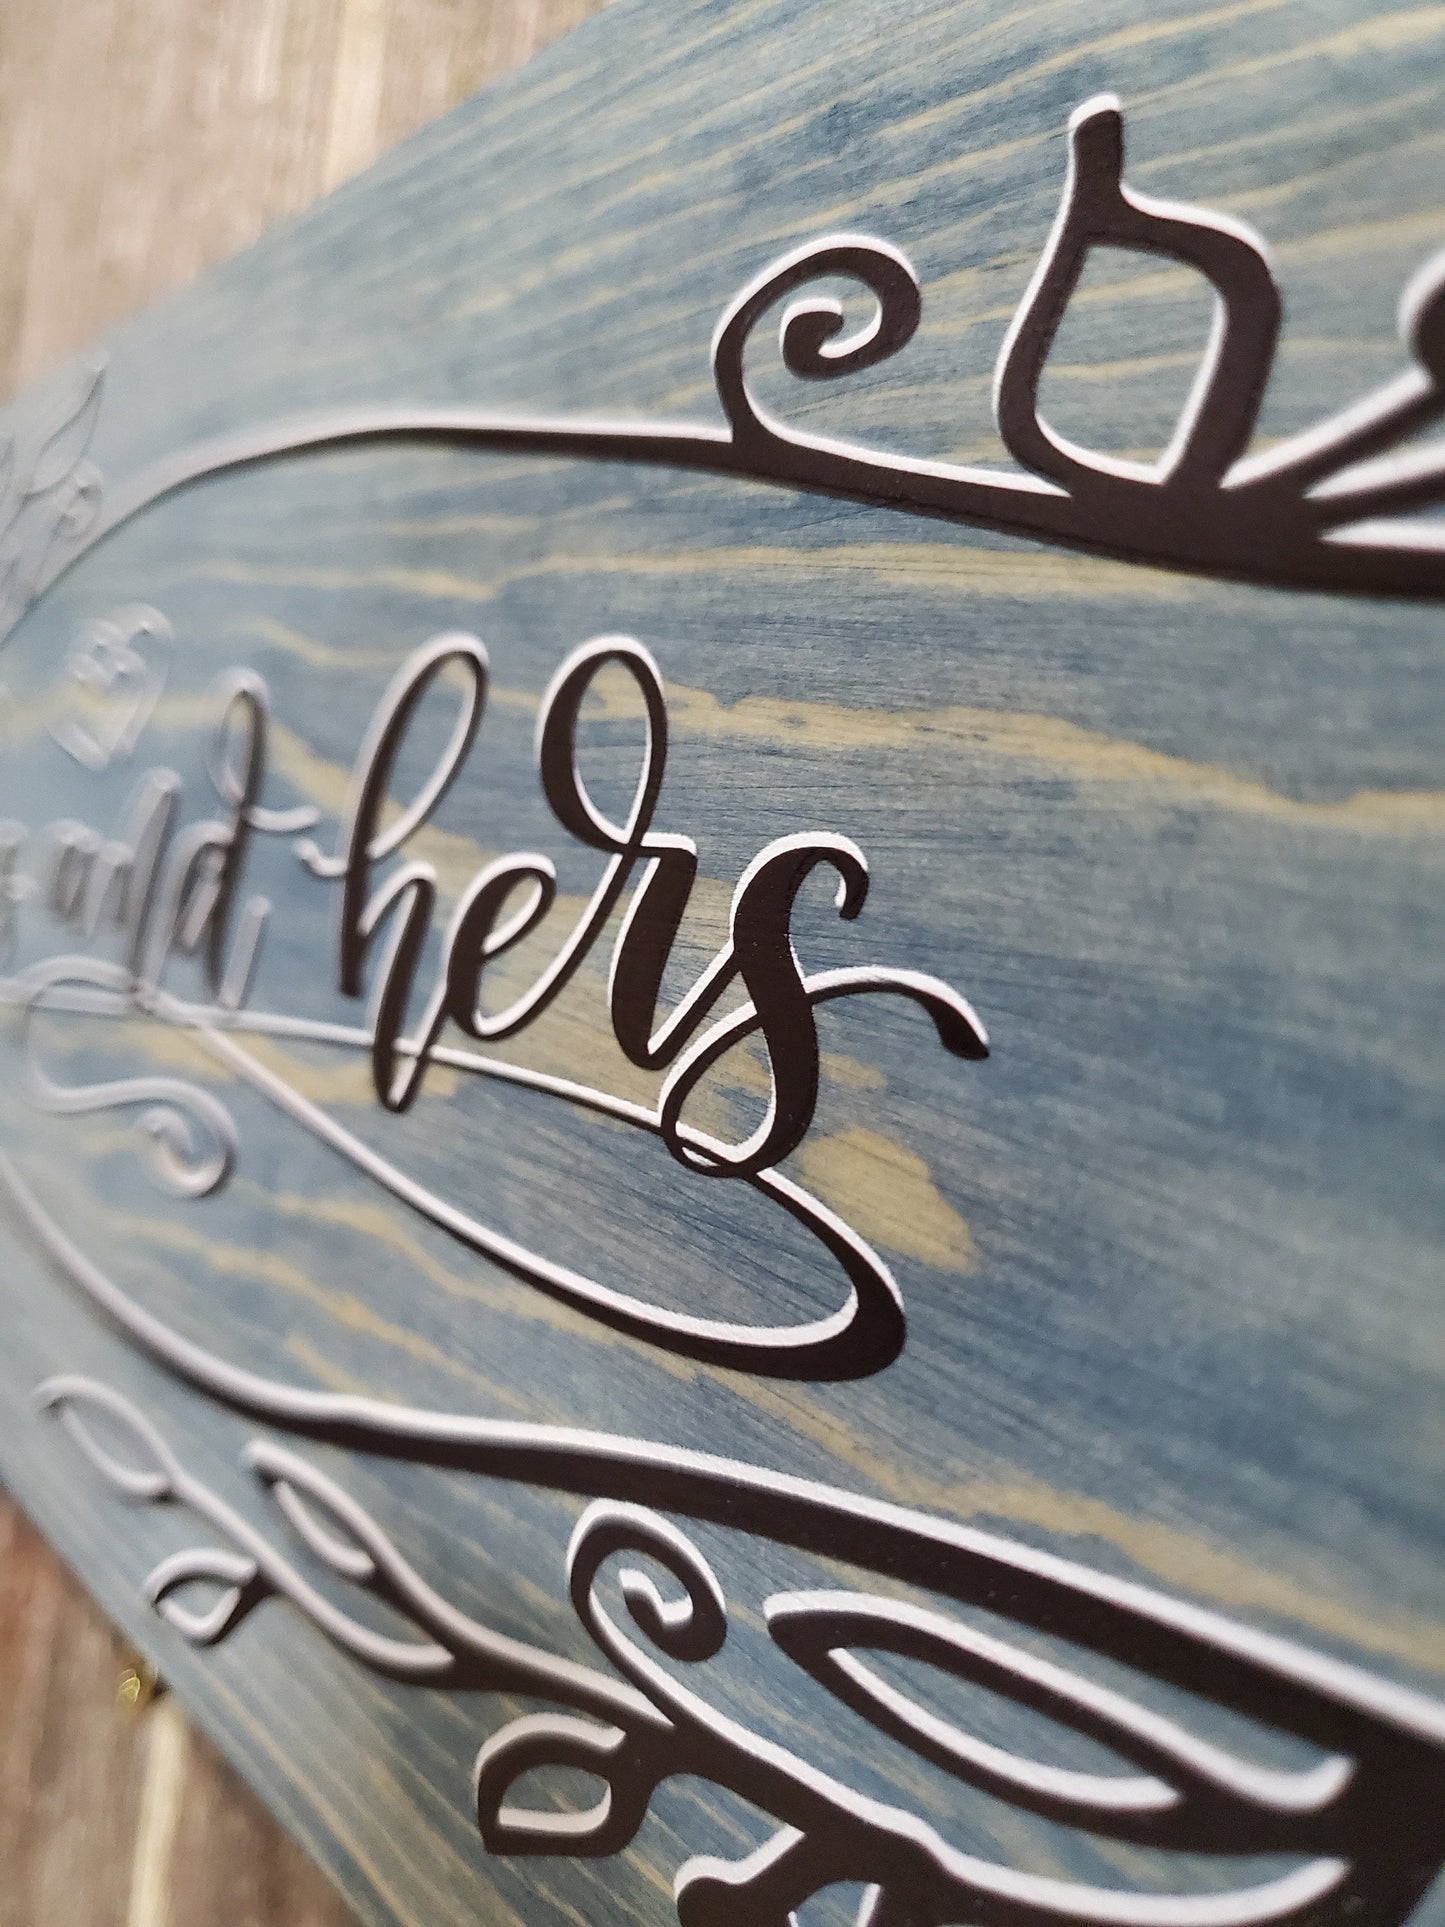 His and Hers Wall Sign Wedding Wood Scroll Work Plaque Text Decor Script Wall Art Color Wood Print